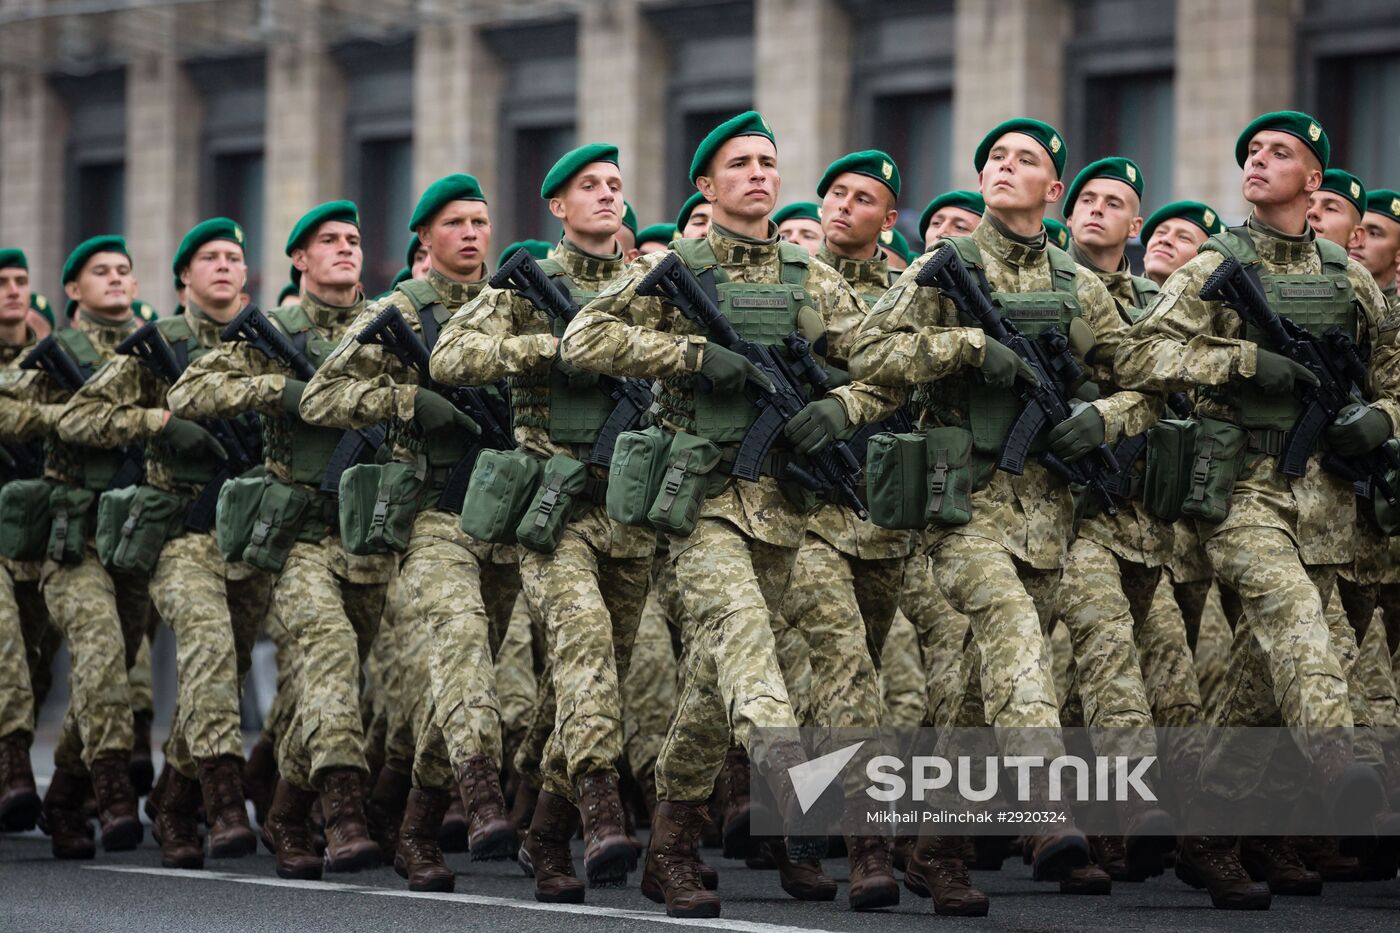 Military parade to mark 25th anniversary of Ukraine's Independence Day